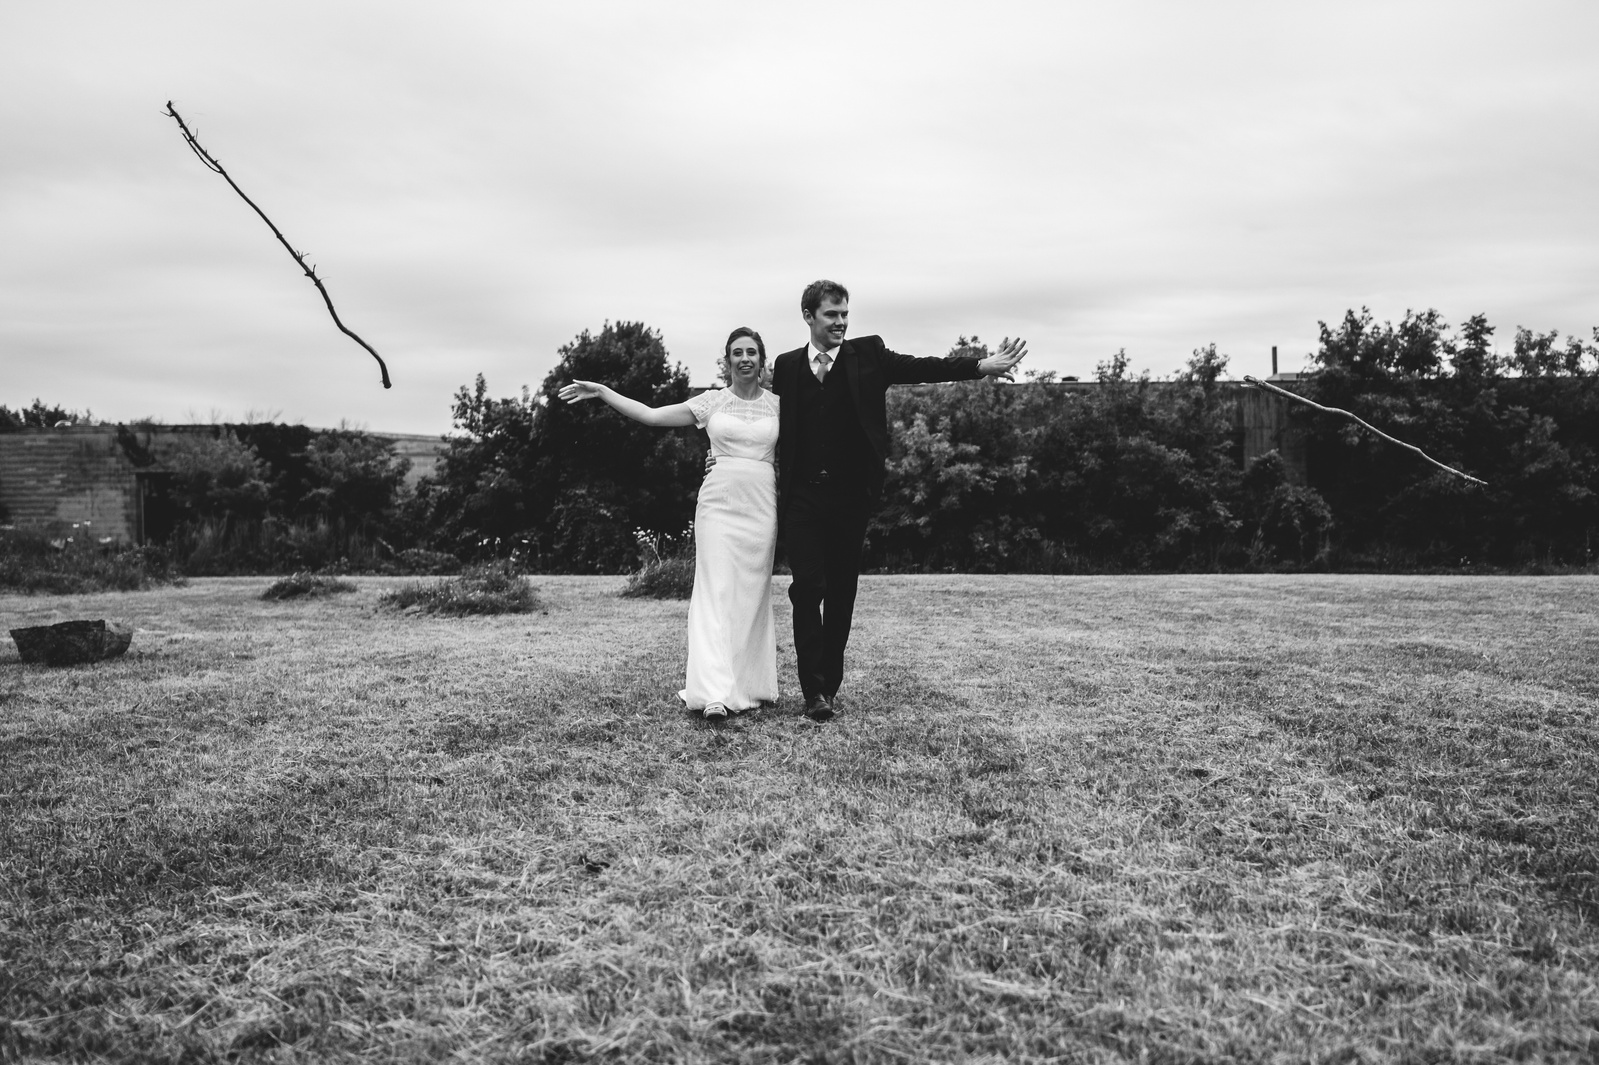 black and white photo of couple, bride and groom standing in a field tossing sticks.  Married at the Urban Ecology Center in Milwaukee, Wisconsin.  Summer wedding, laid back and low key.